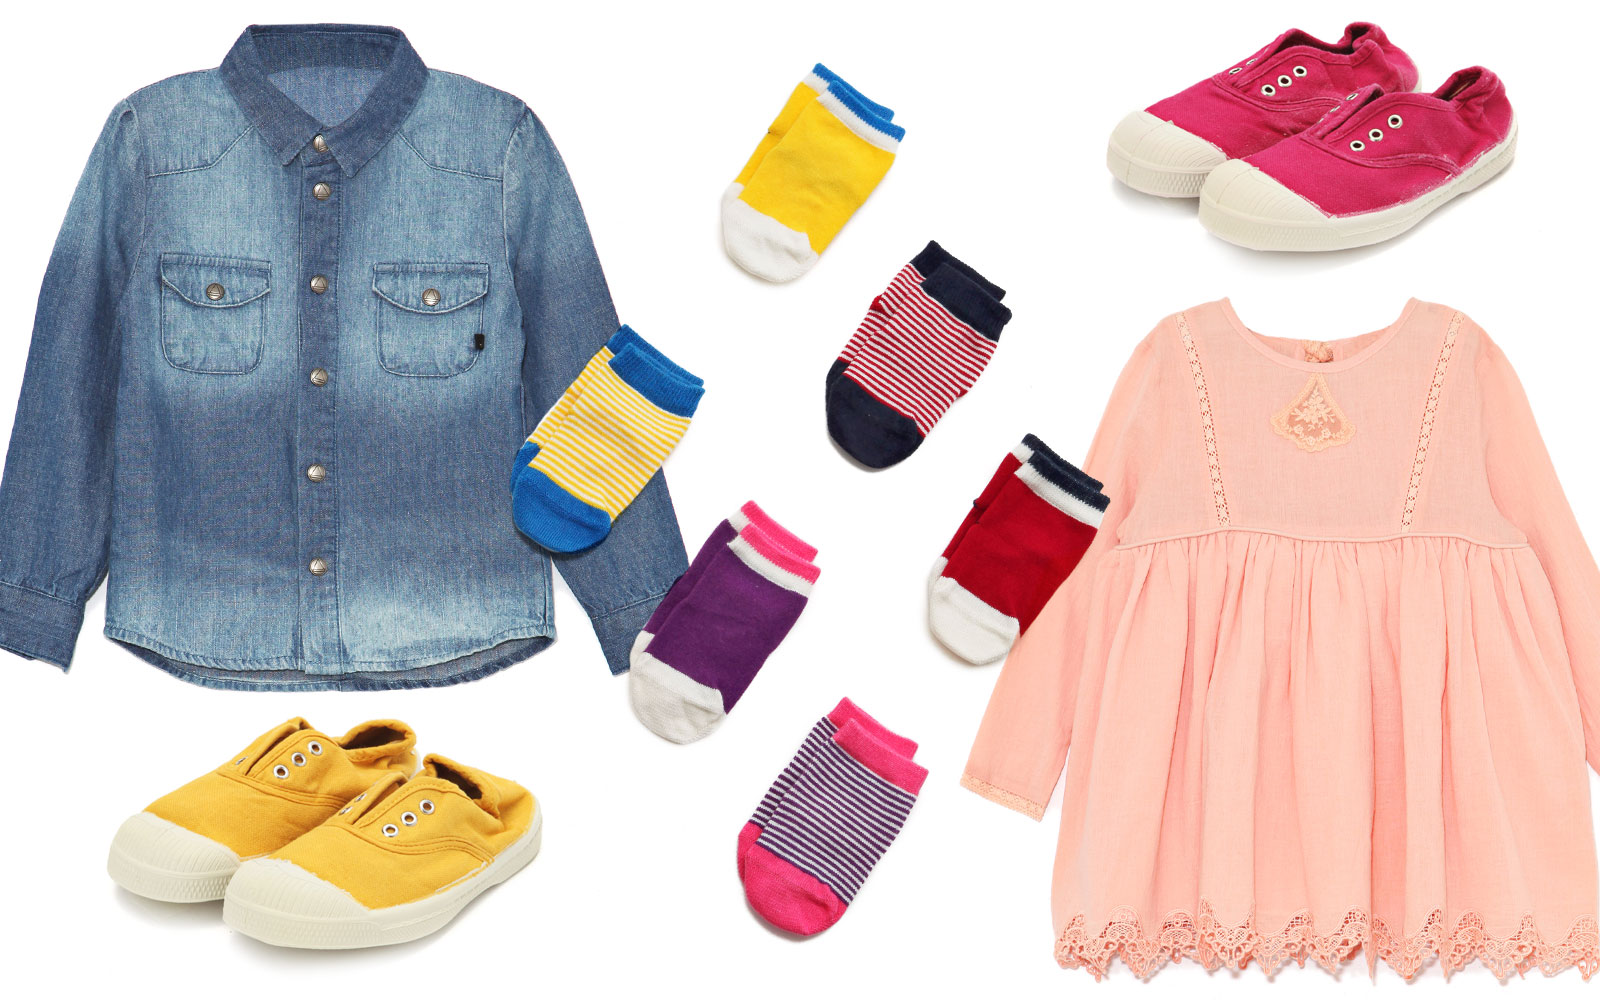 KID'S DESIGNERS OUTFIT＆ACCESSORIES